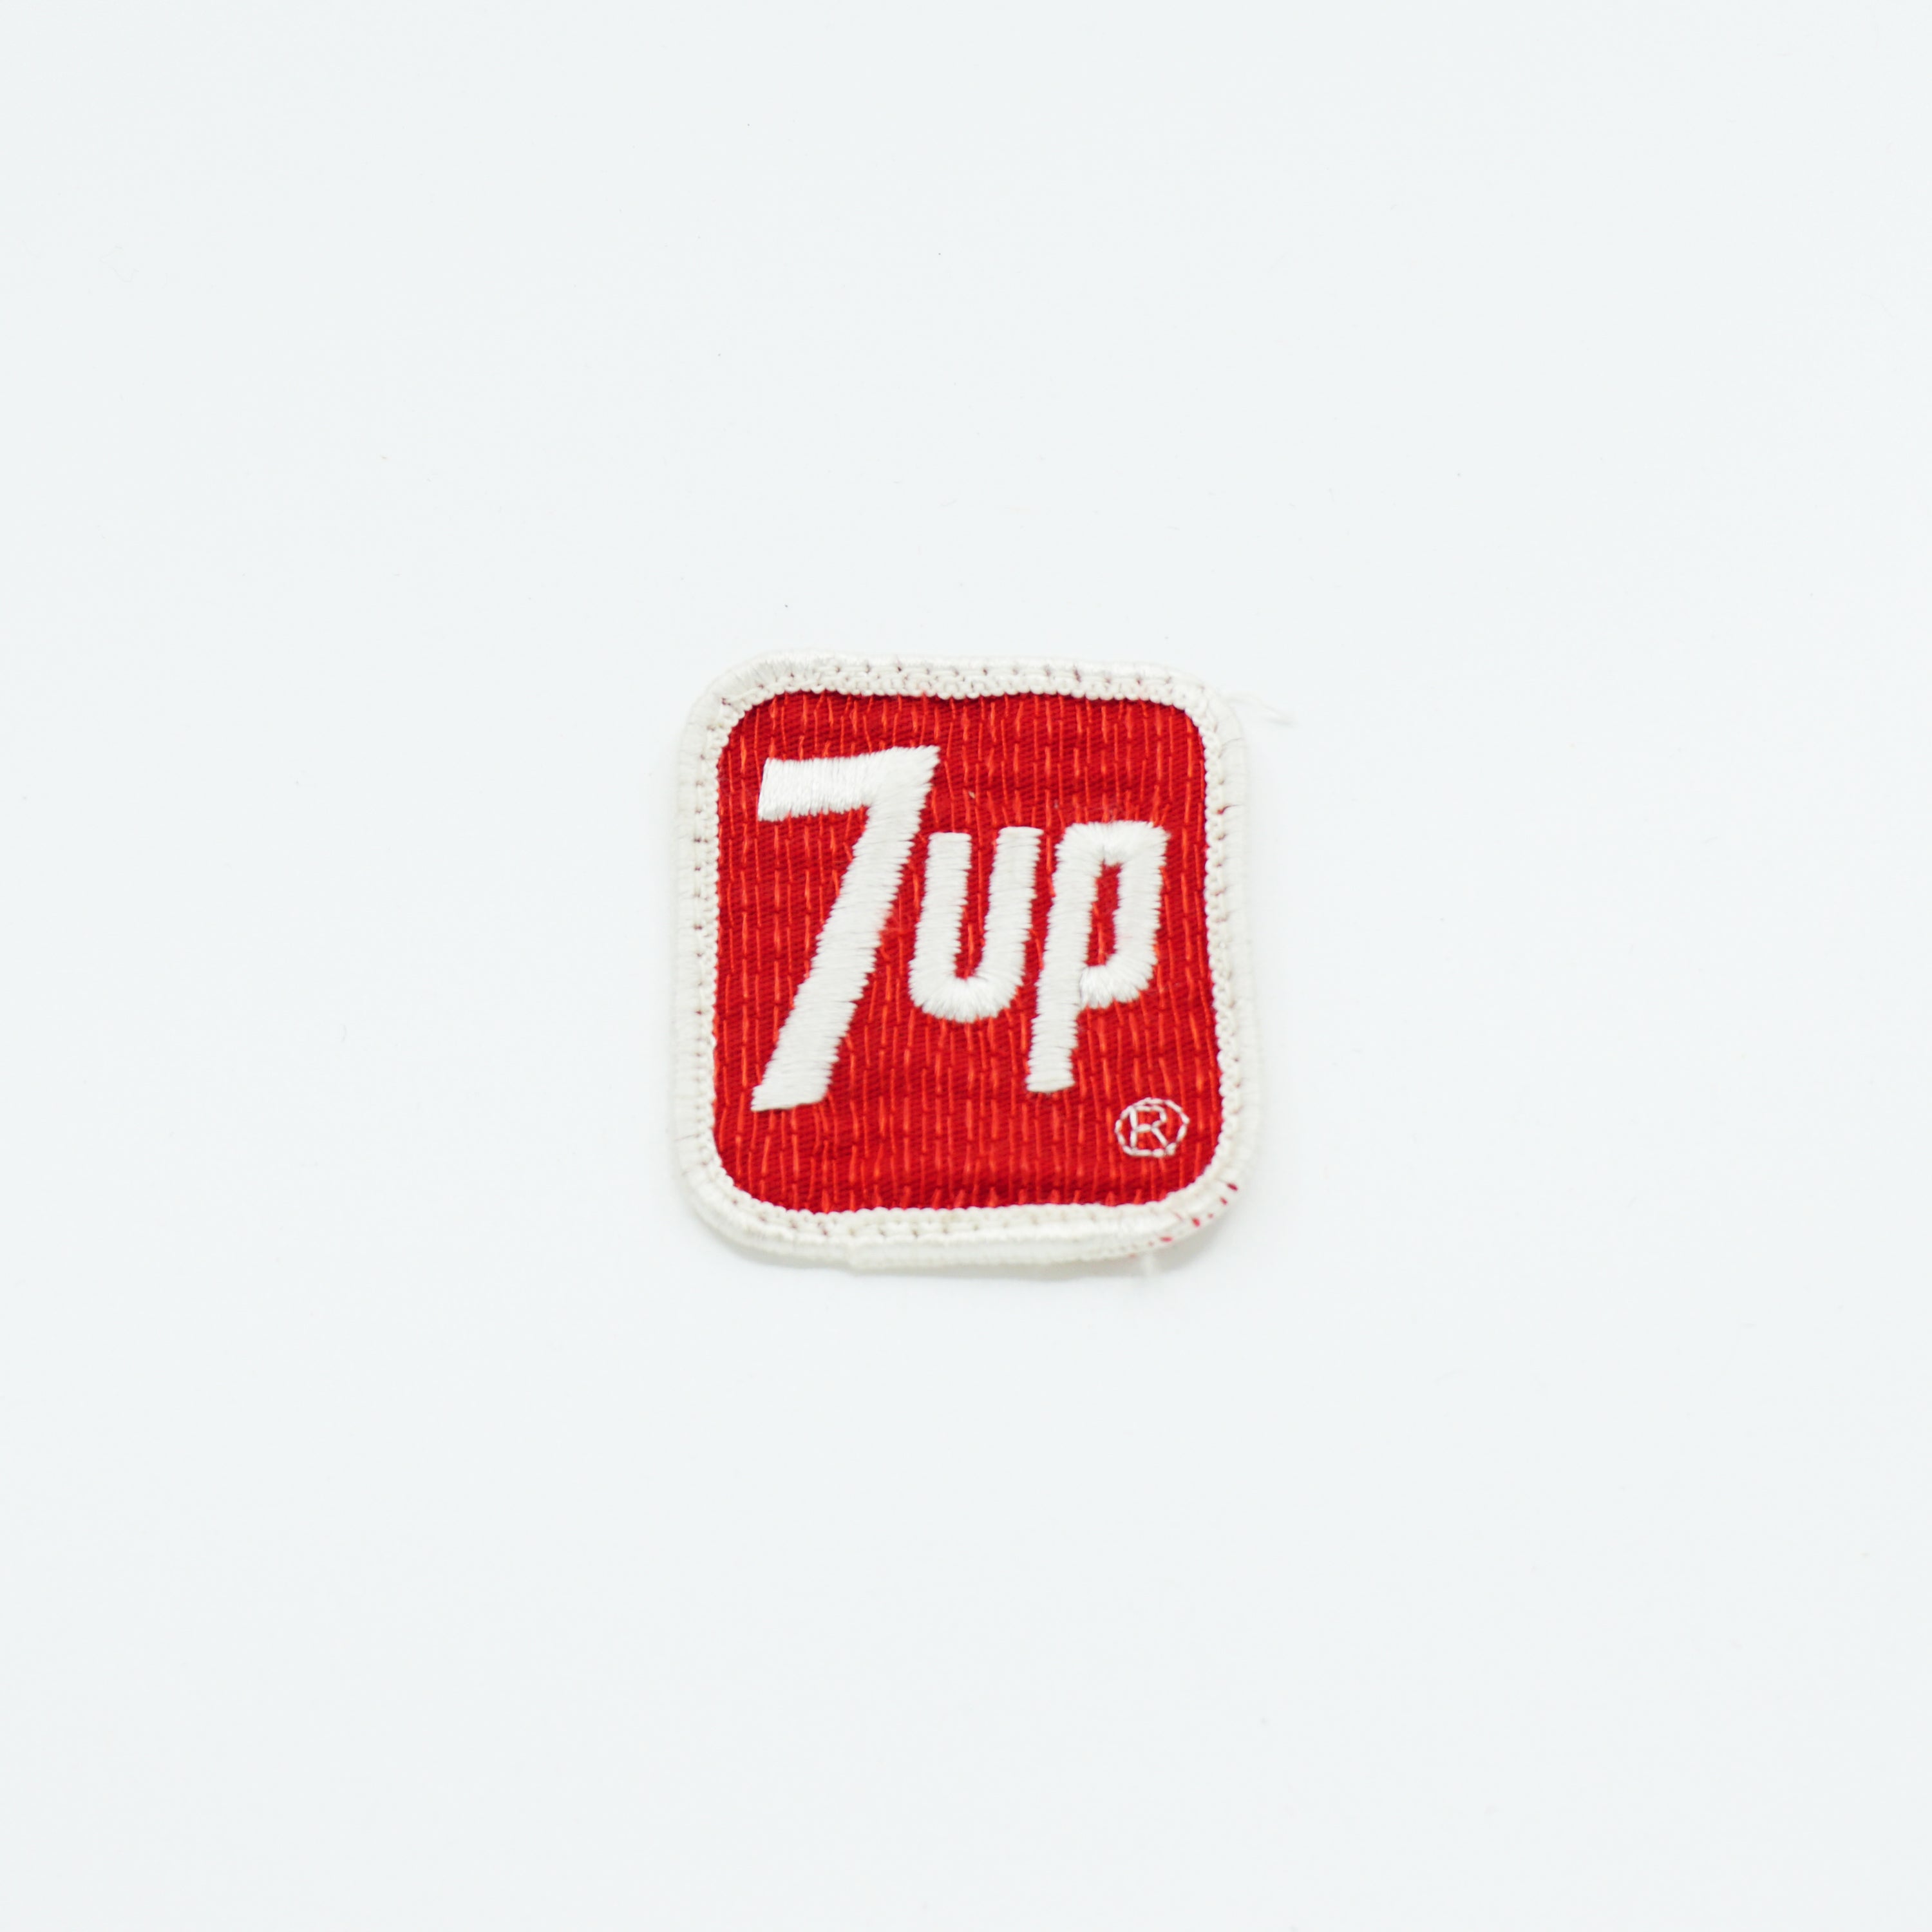 Small 7up Clothing Patch. 2" x 2.25" Square, Round Corners. Red and White